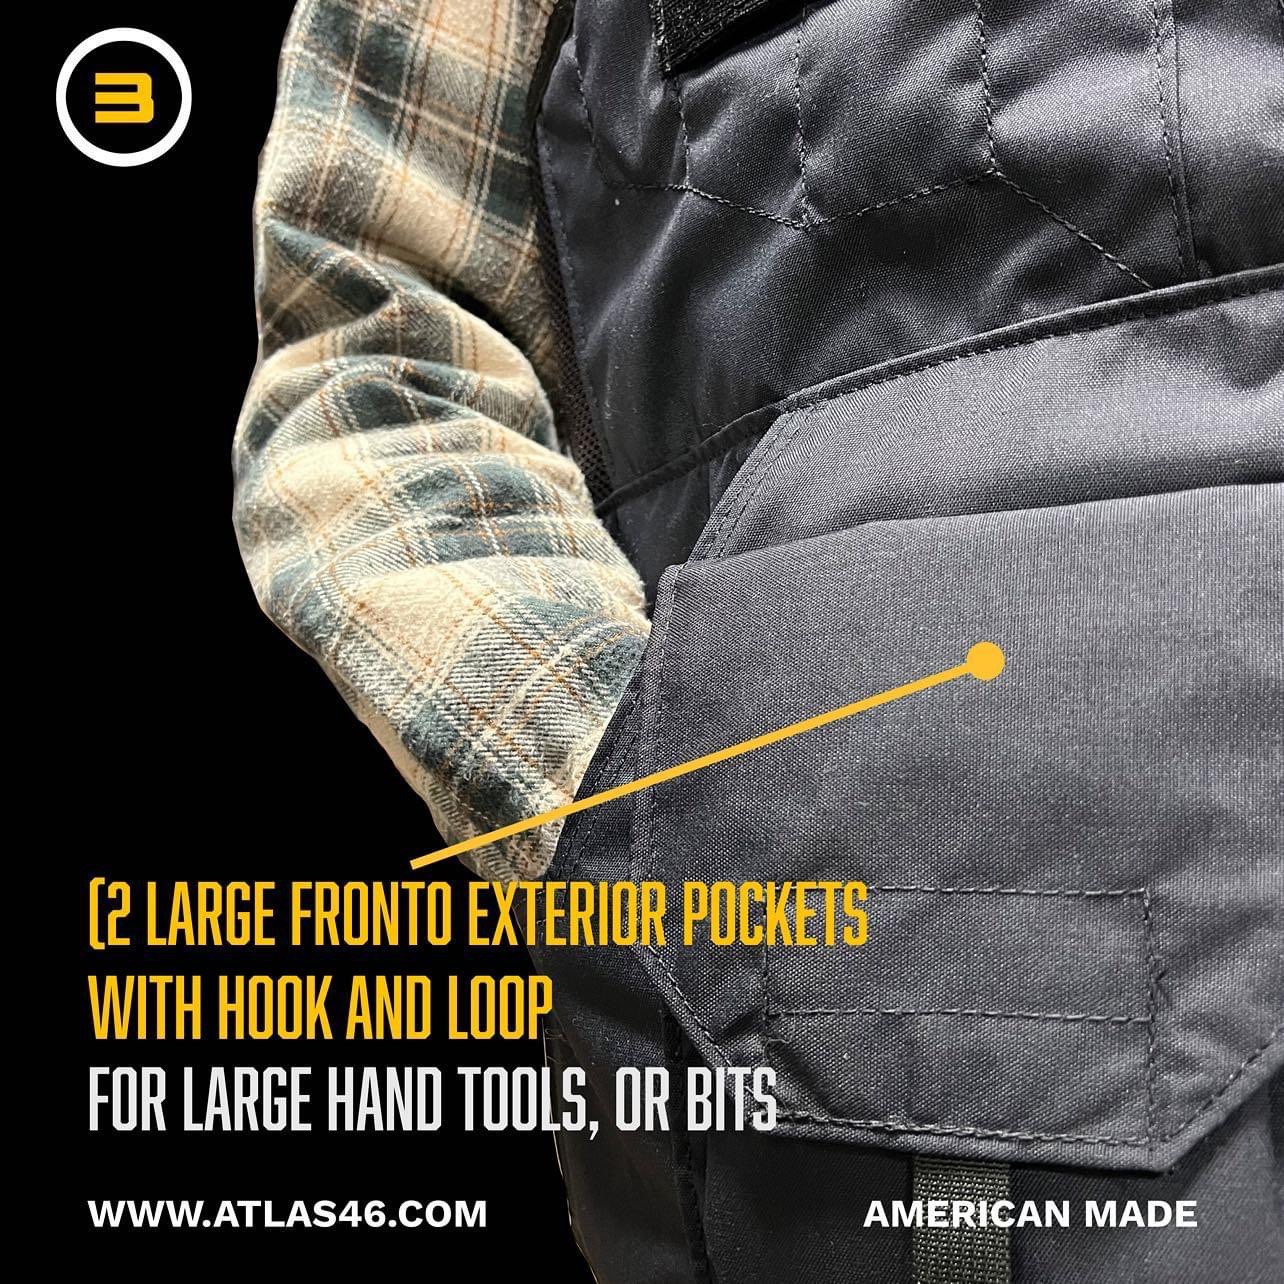 Atlas 46 – 1819 Work Vest - Soldier Systems Daily